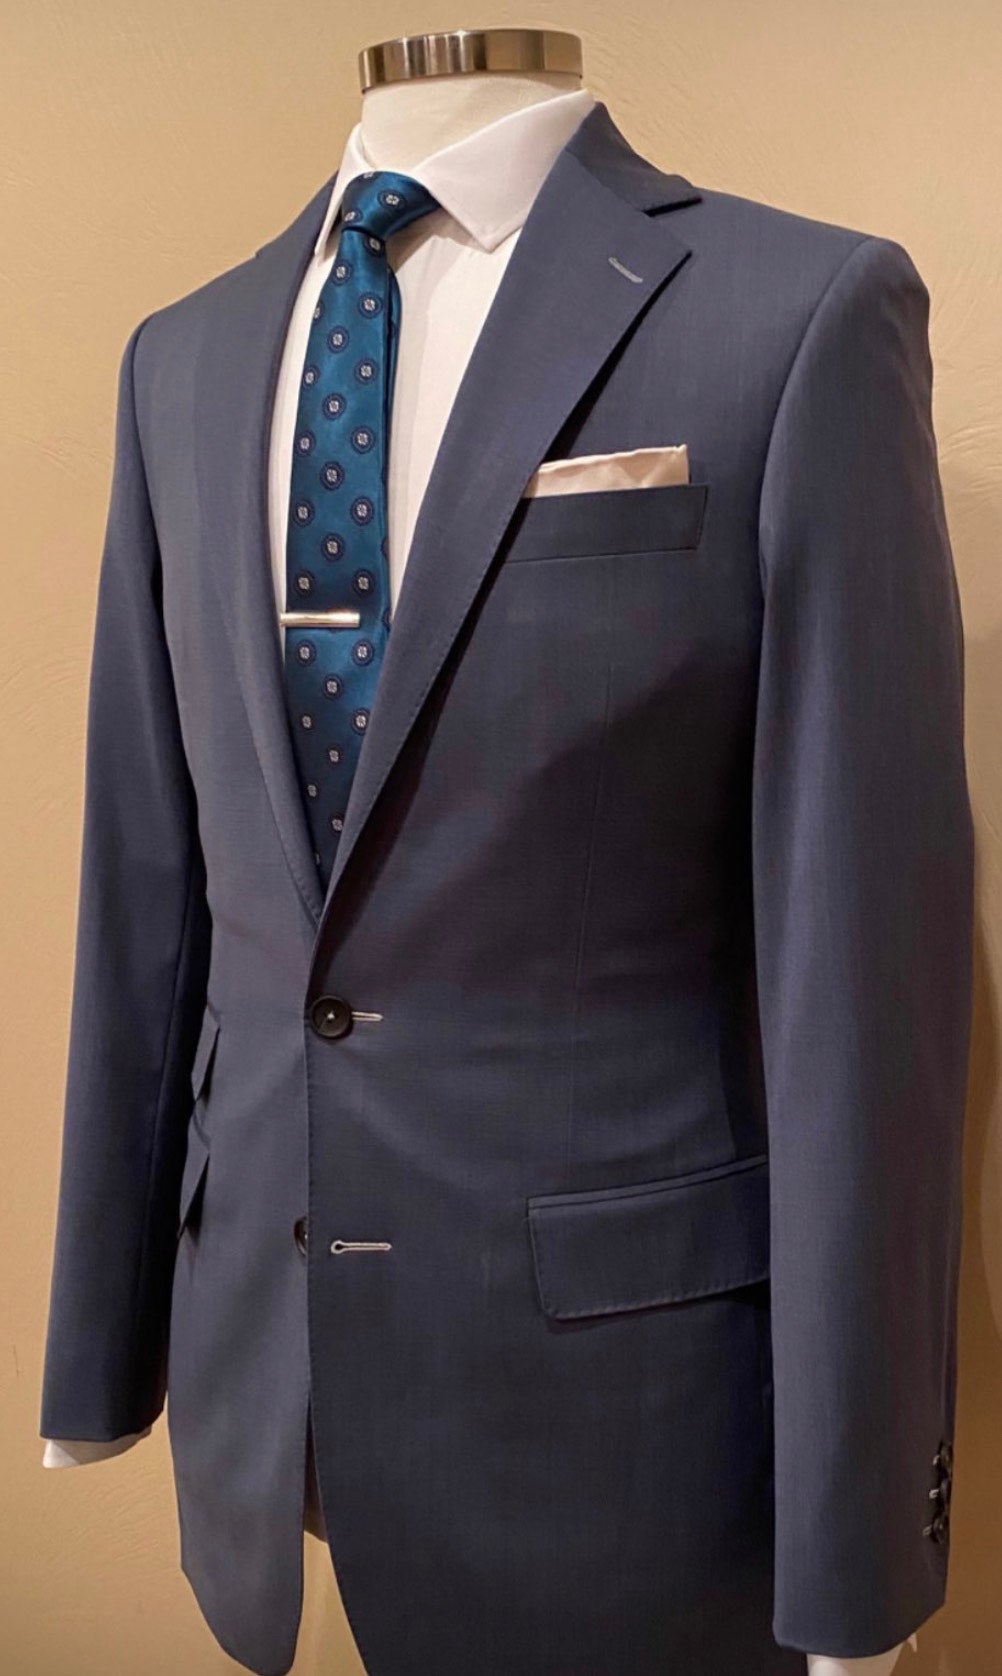 Look smart with Classic yet chic looking suit can be yours today with  selecting personal fabrics – Foto de Steve & James, Banguecoque -  Tripadvisor